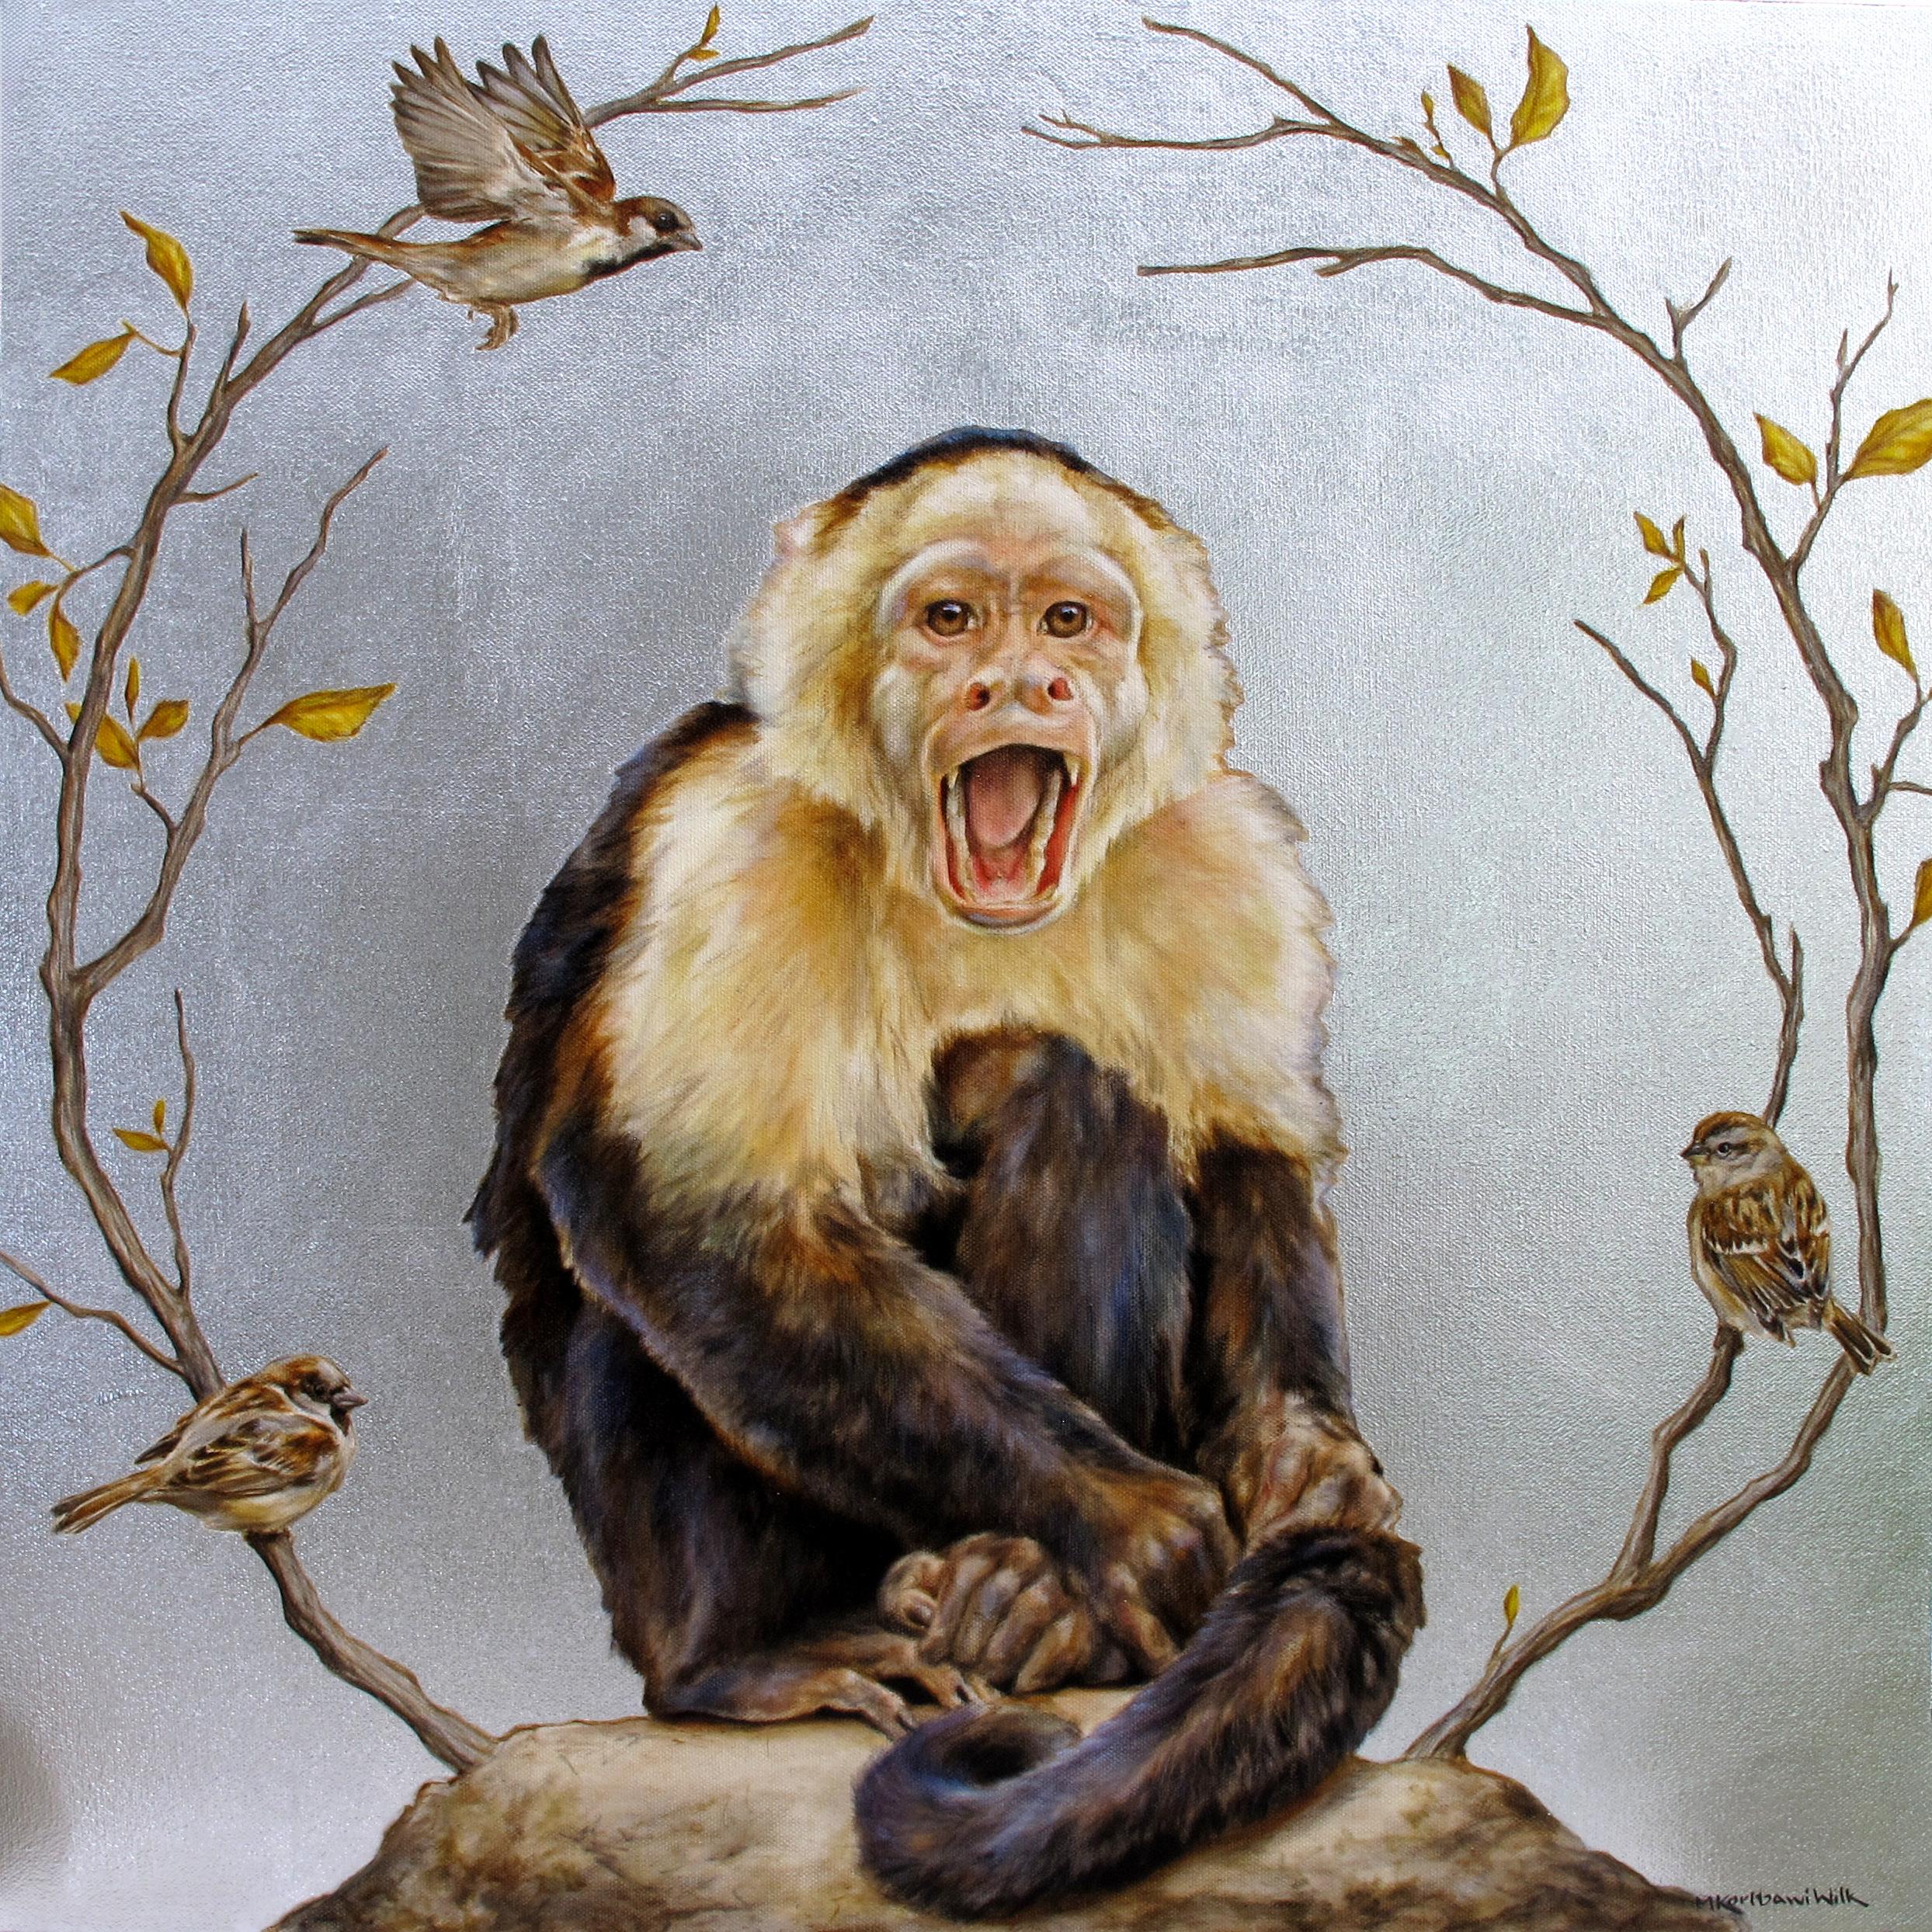 Michele Kortbawi Wilk Figurative Painting - "Monkey Shock" - Oil Painting with Silver Leaf featuring a Primate and Sparrows